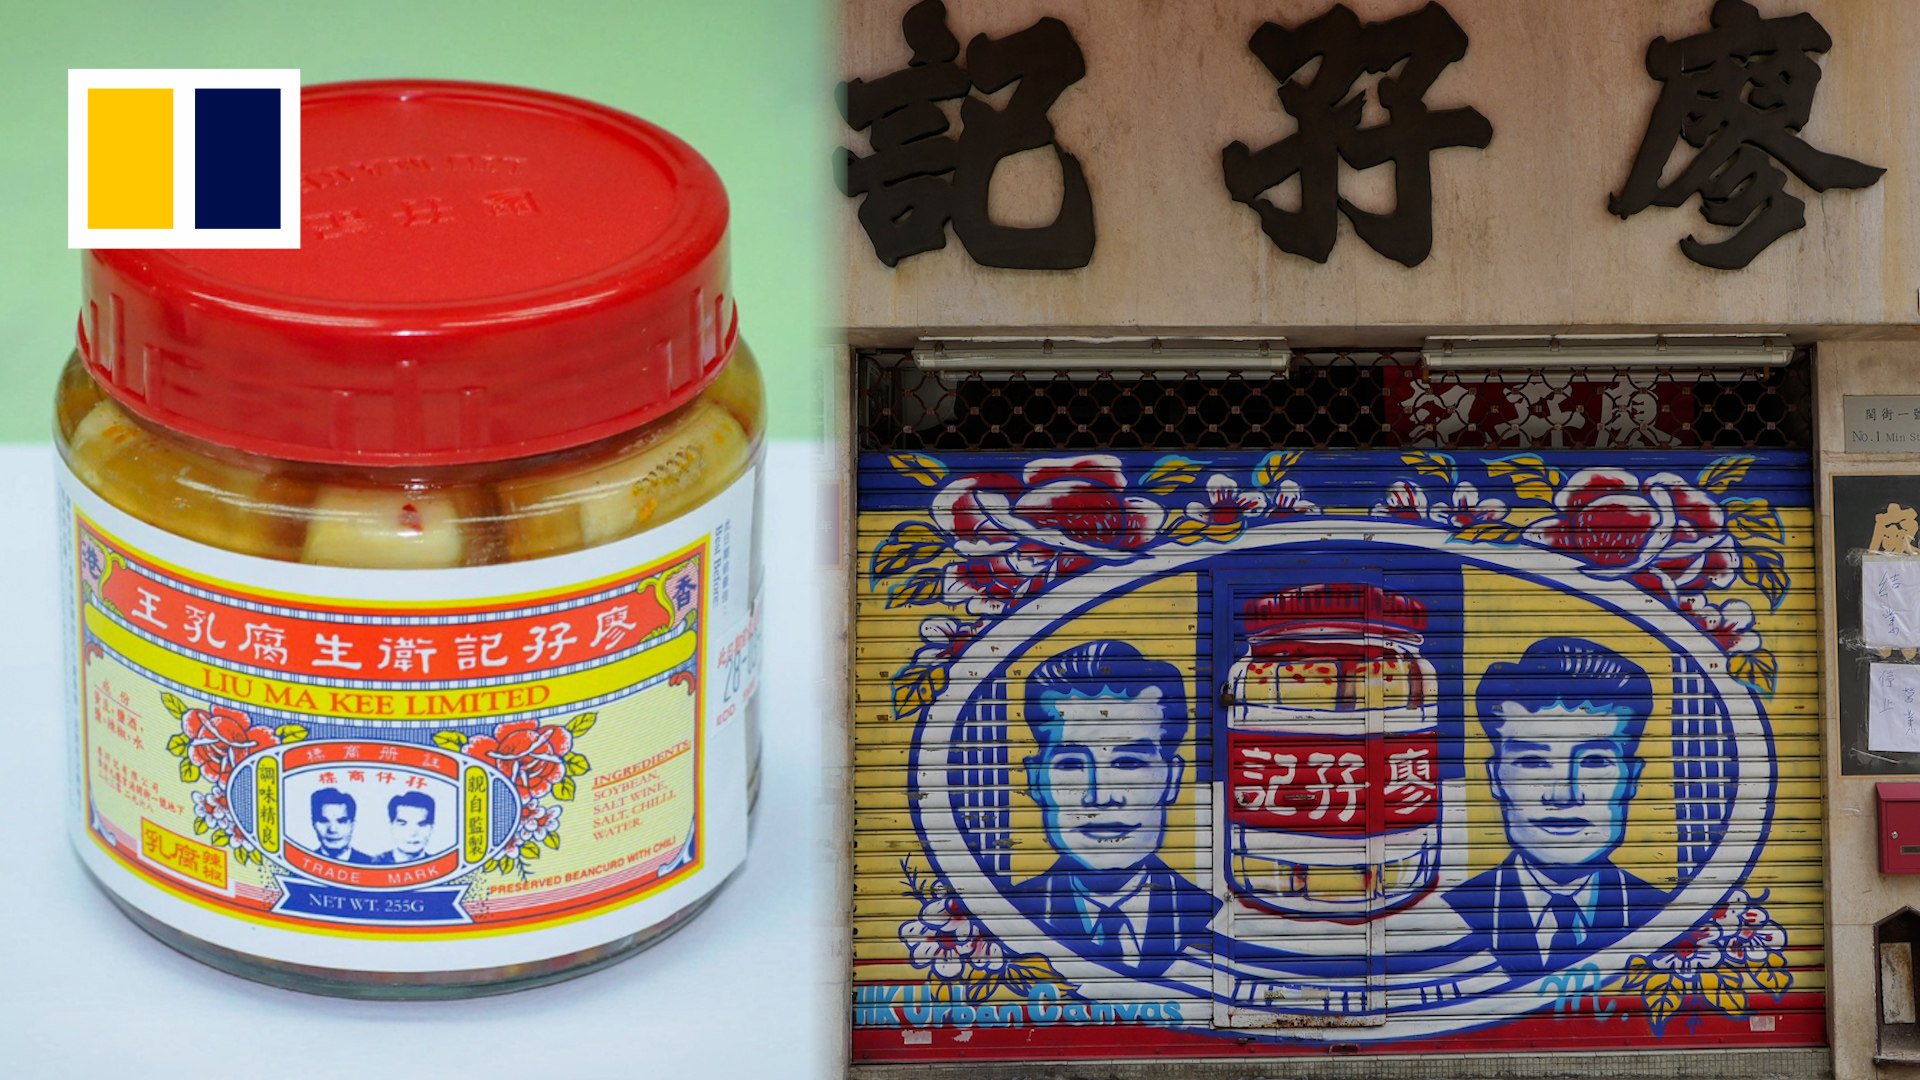 A jar of Liu Ma Kee fermented bean curd. The famous local brand has admitted importing fermented bean curds. Photo: SCMP Composite